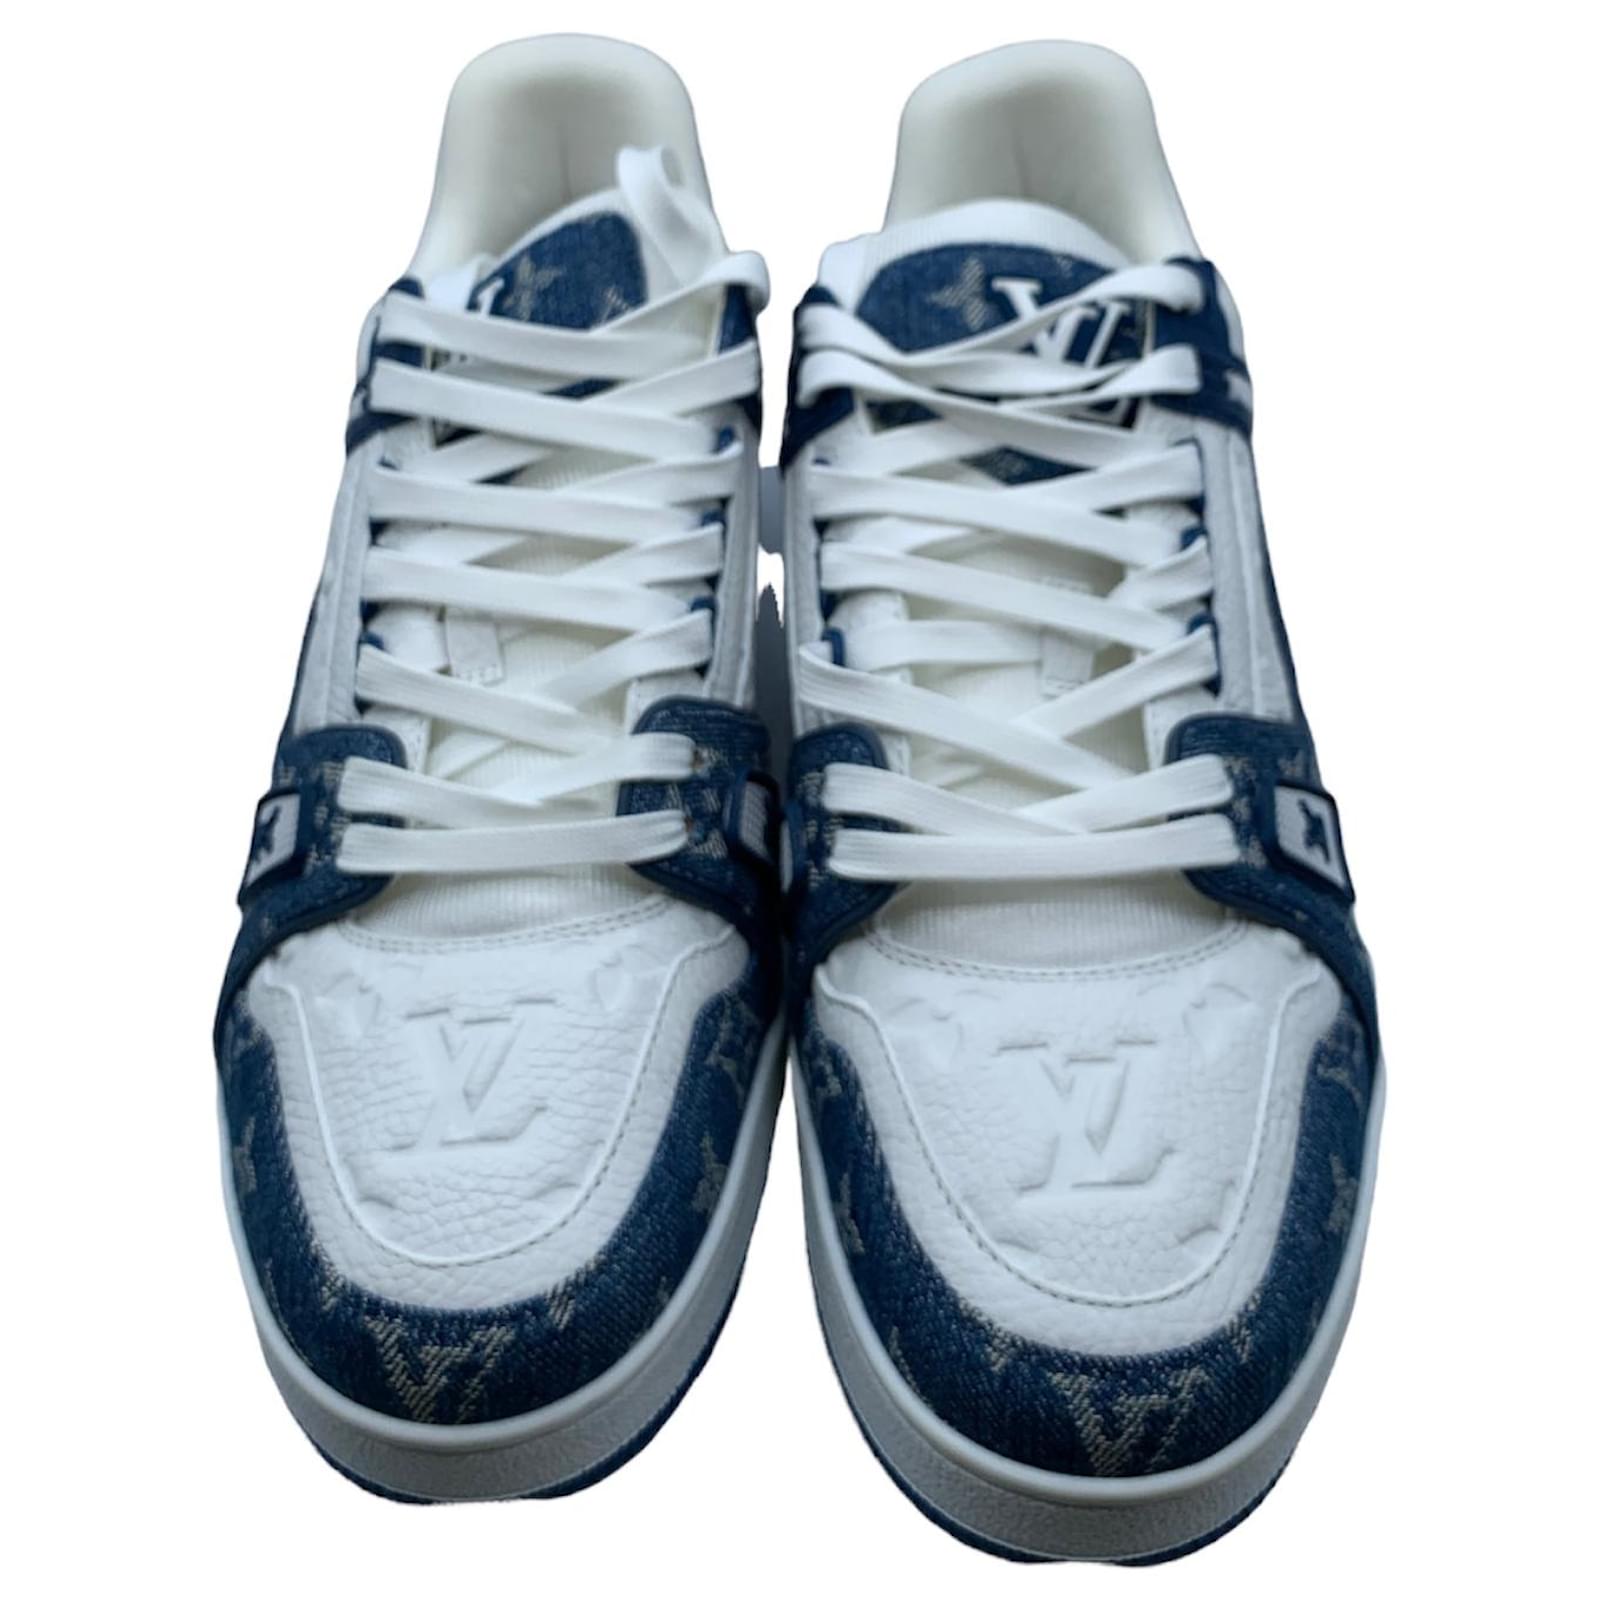 louis vuitton shoes white and blue